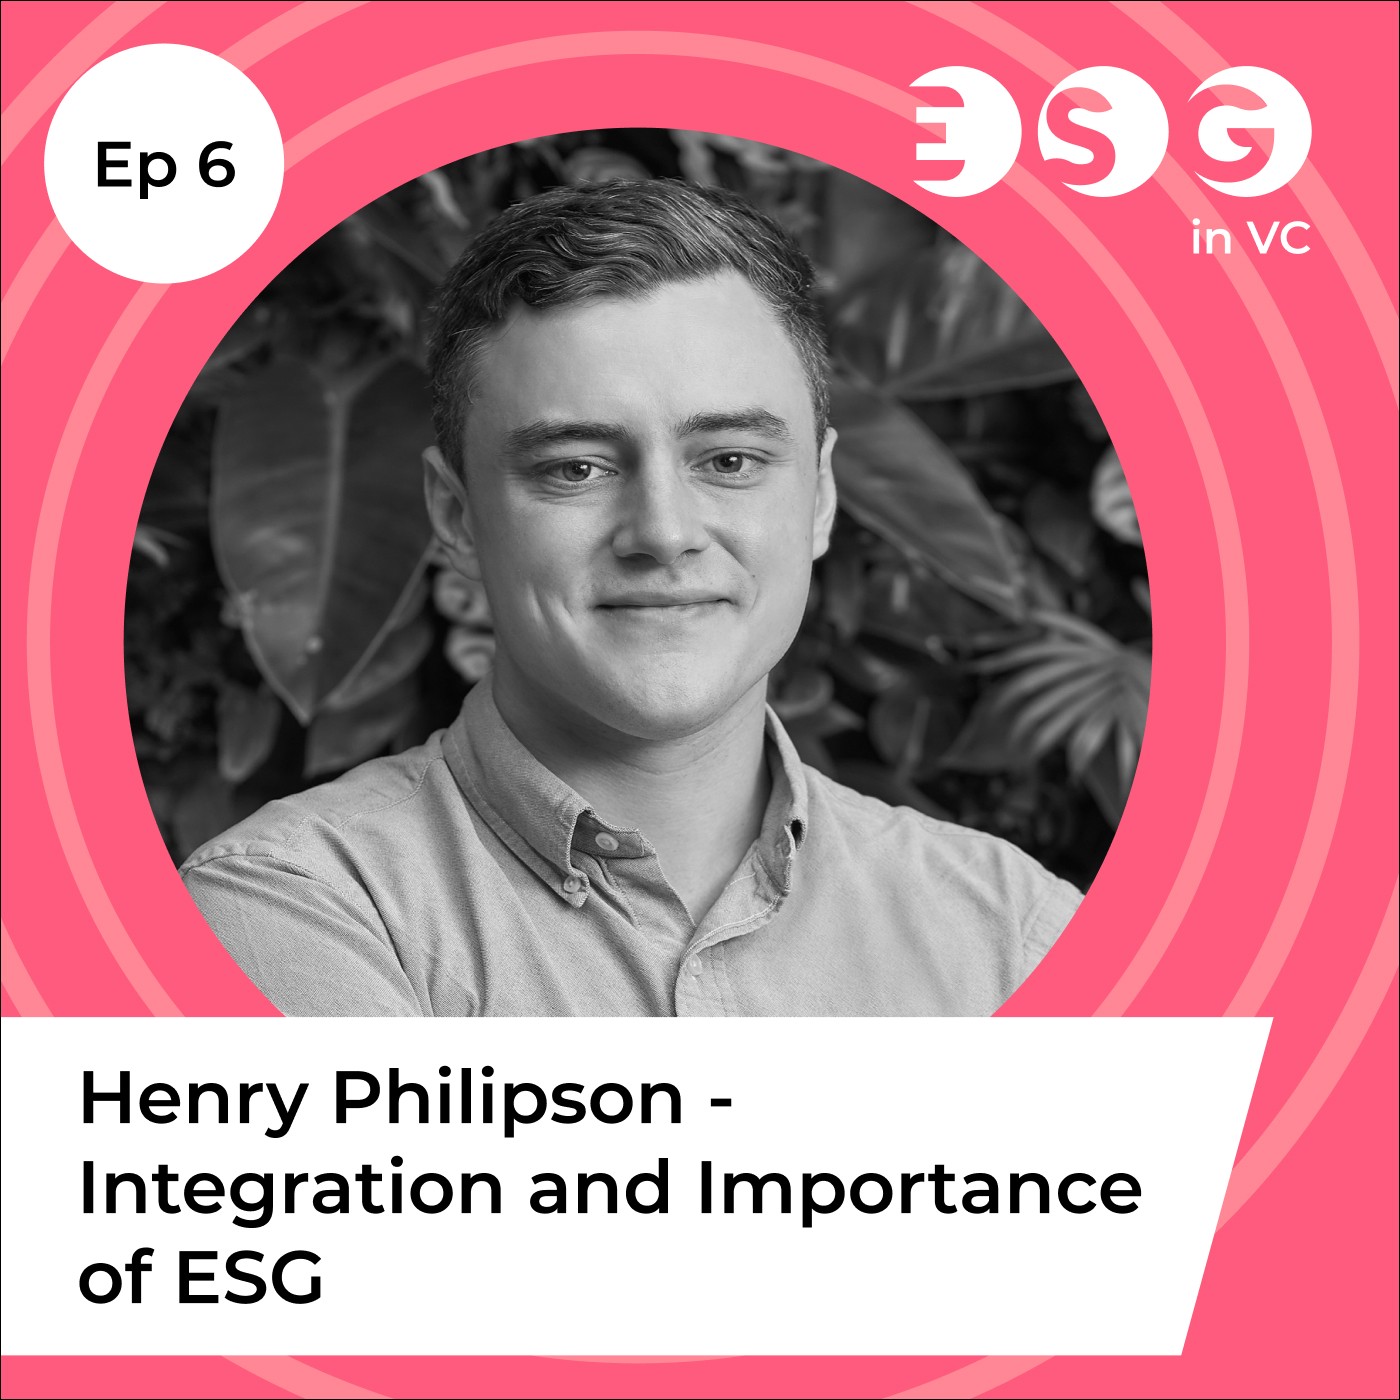 Ep 6 - Henry Philipson - Integration and Importance of ESG